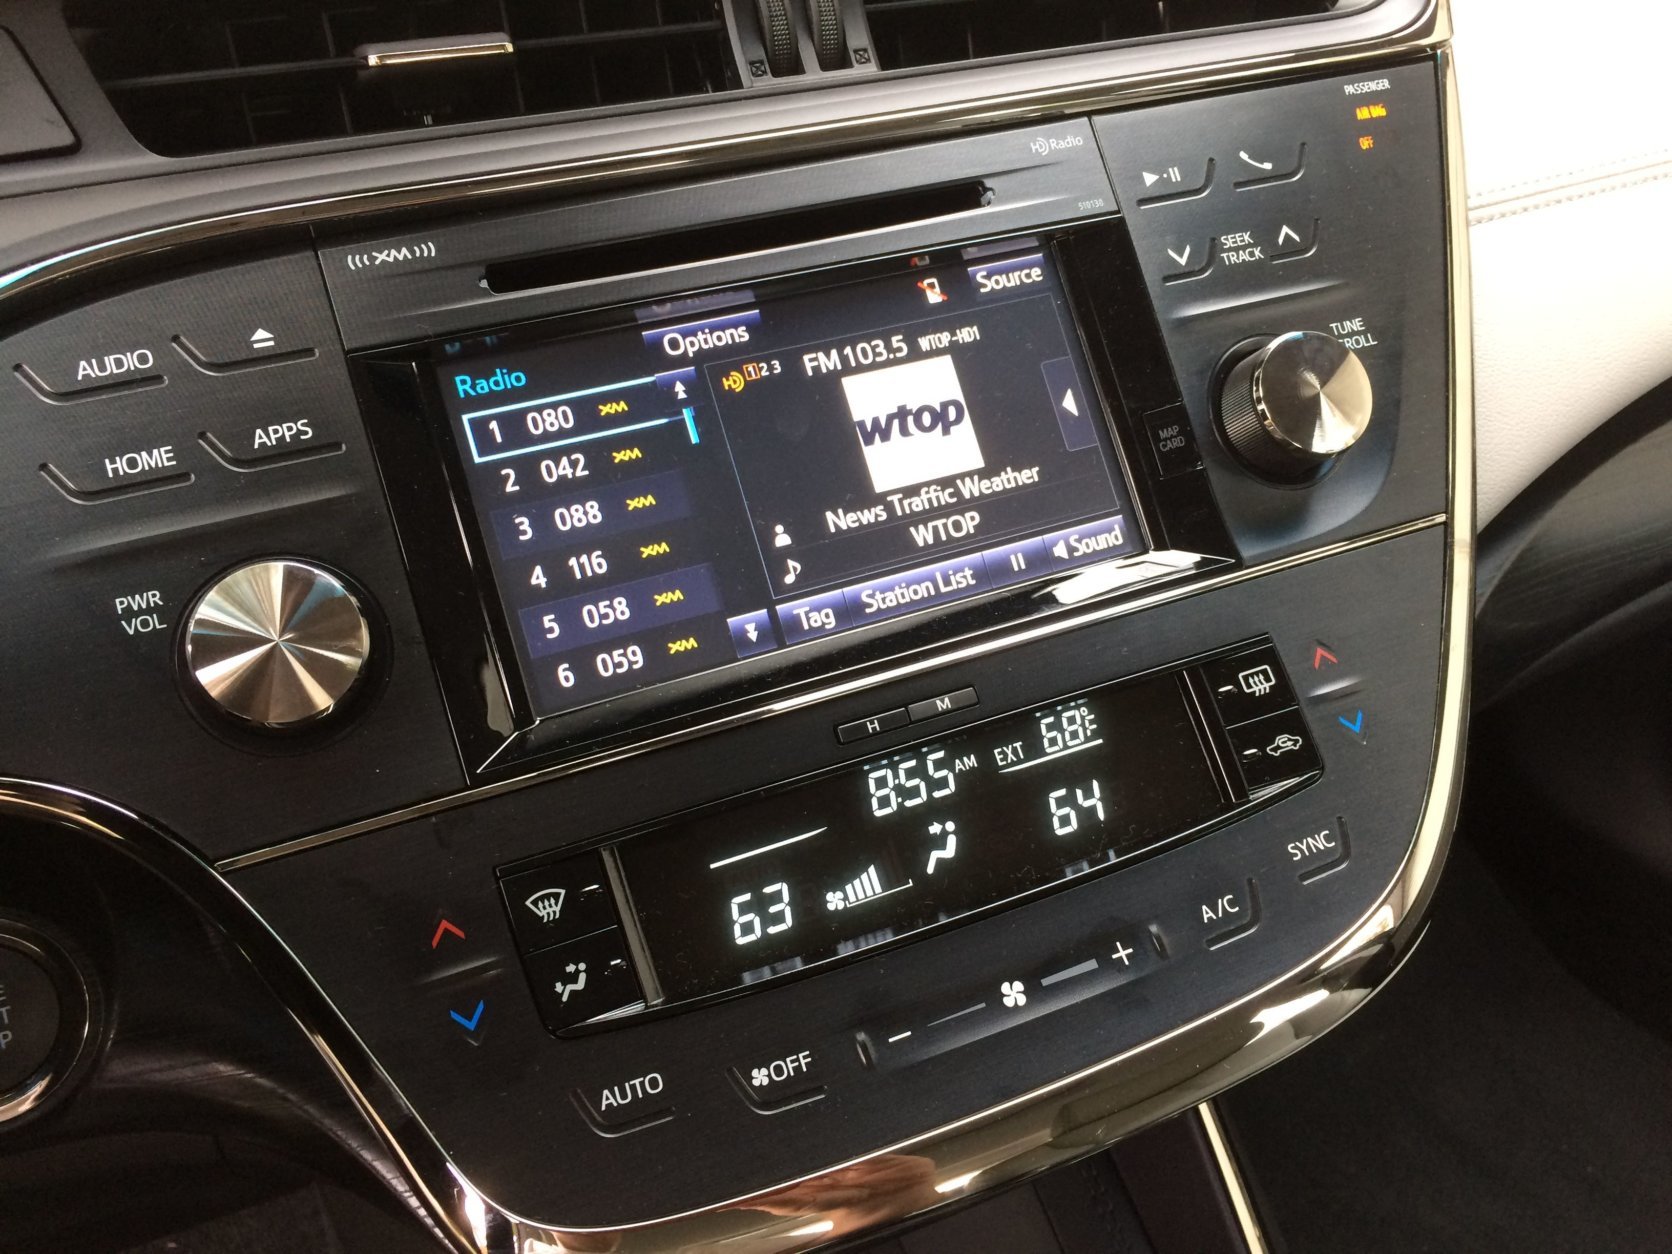 There is 7-inch touchscreen, but it's not the largest in this class and sometimes wasn’t the quickest to respond. The NAV system worked well and the voice commands, while not as advanced as others systems, did well with the address input. (WTOP/Mike Parris)